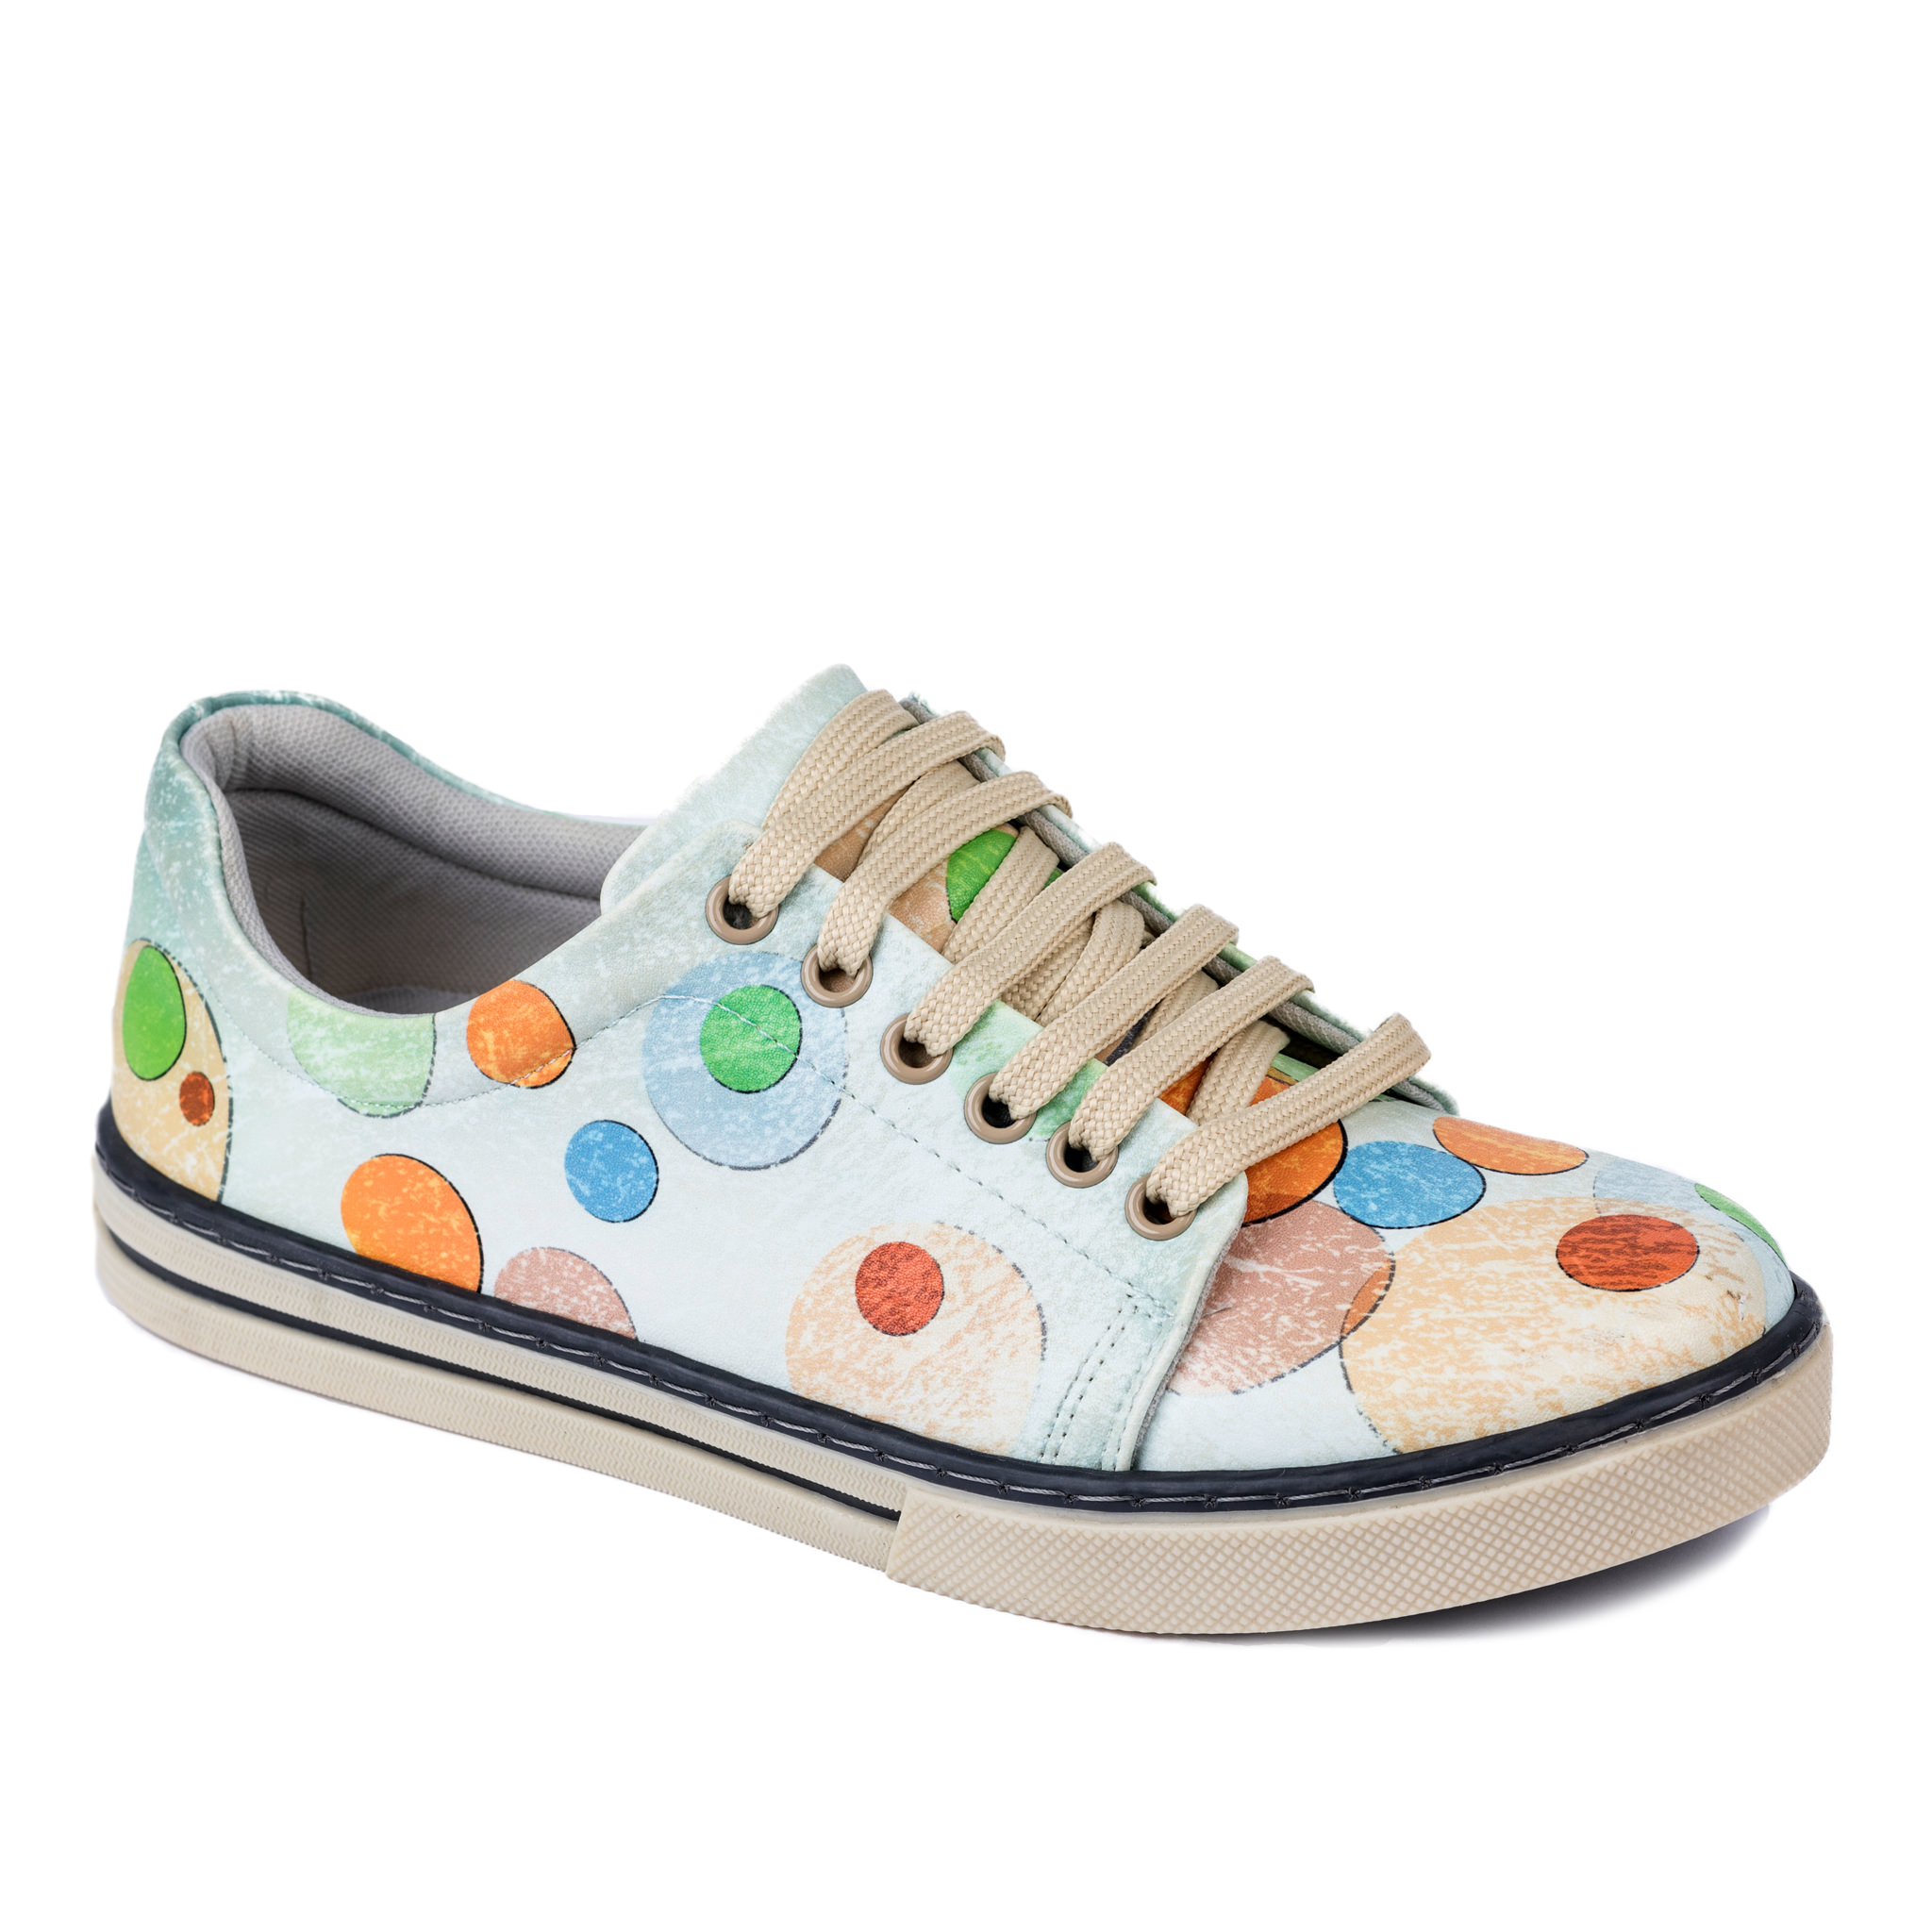 SHALLOW SNEAKERS WITH DOTS - BLUE